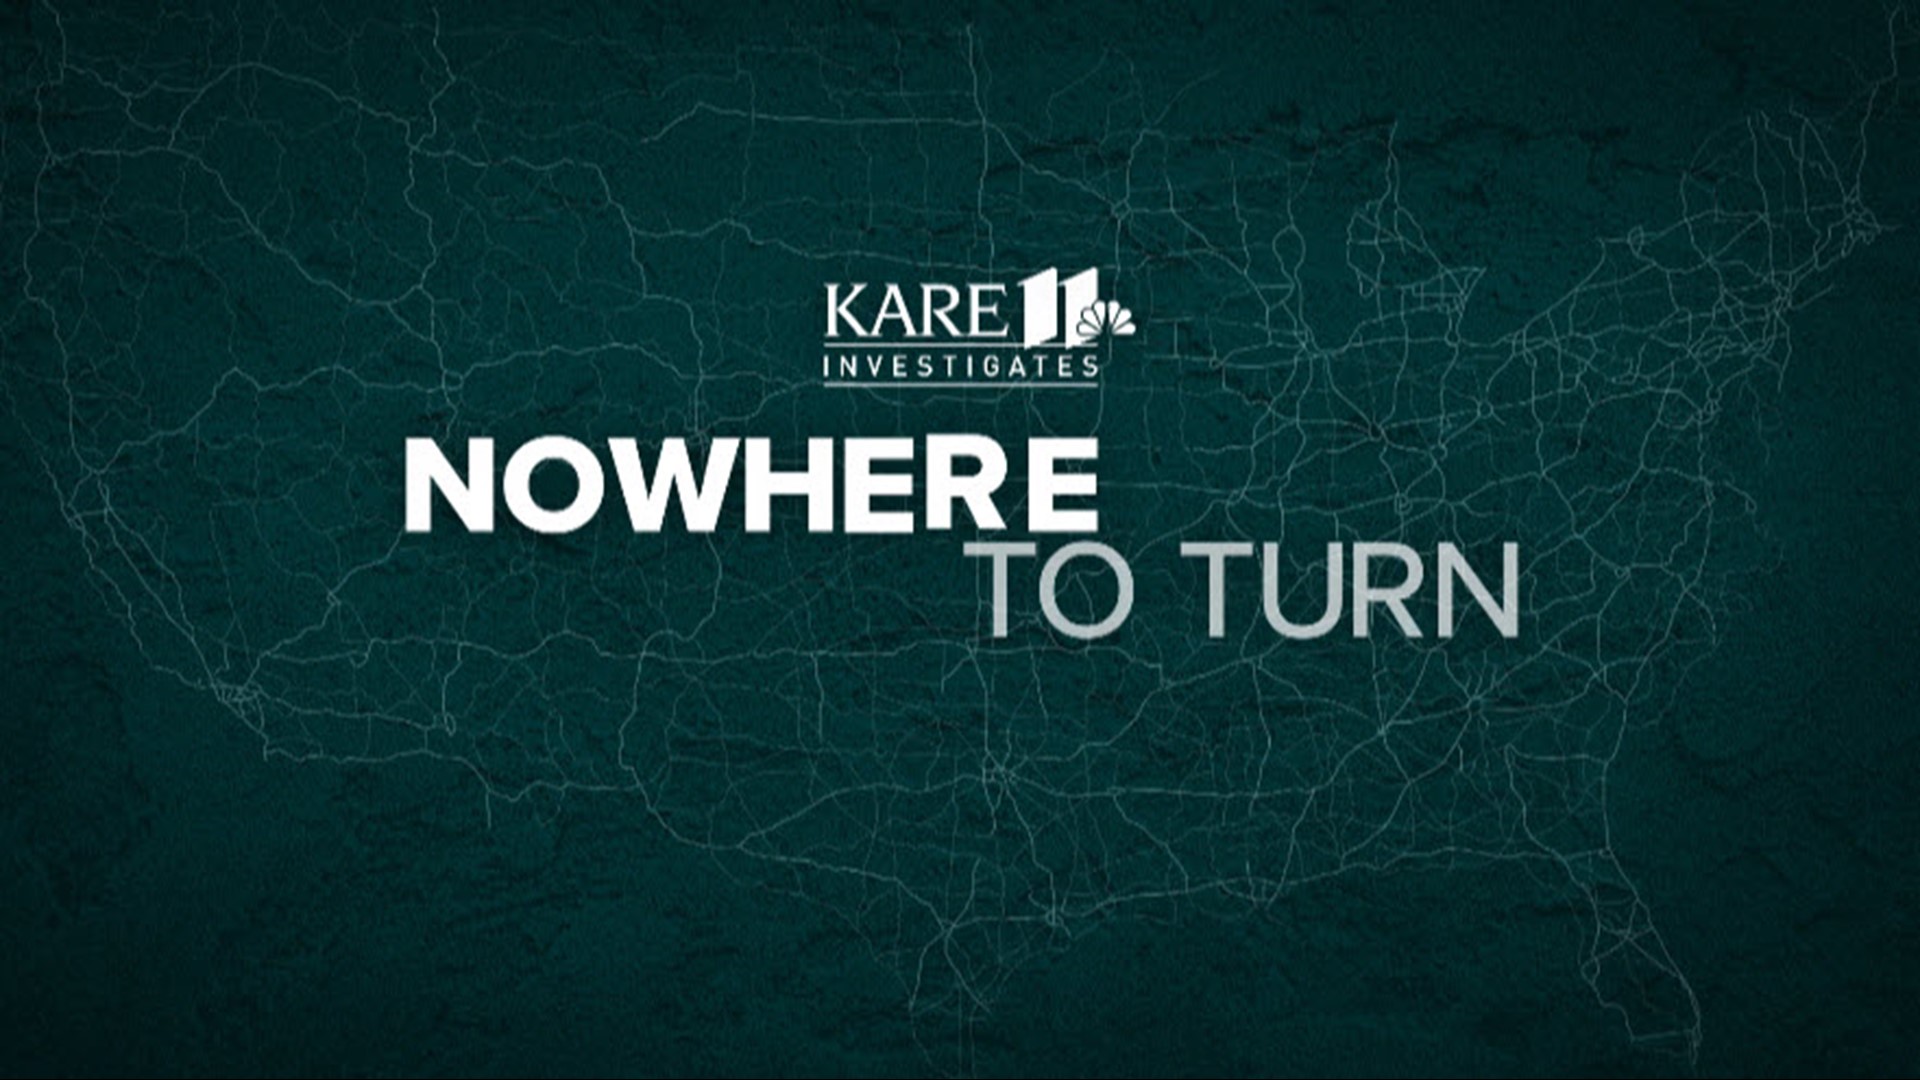 Reform legislation was introduced at the statehouse in response to KARE 11’s investigation exposing sexual violence by private prisoner transport guards.